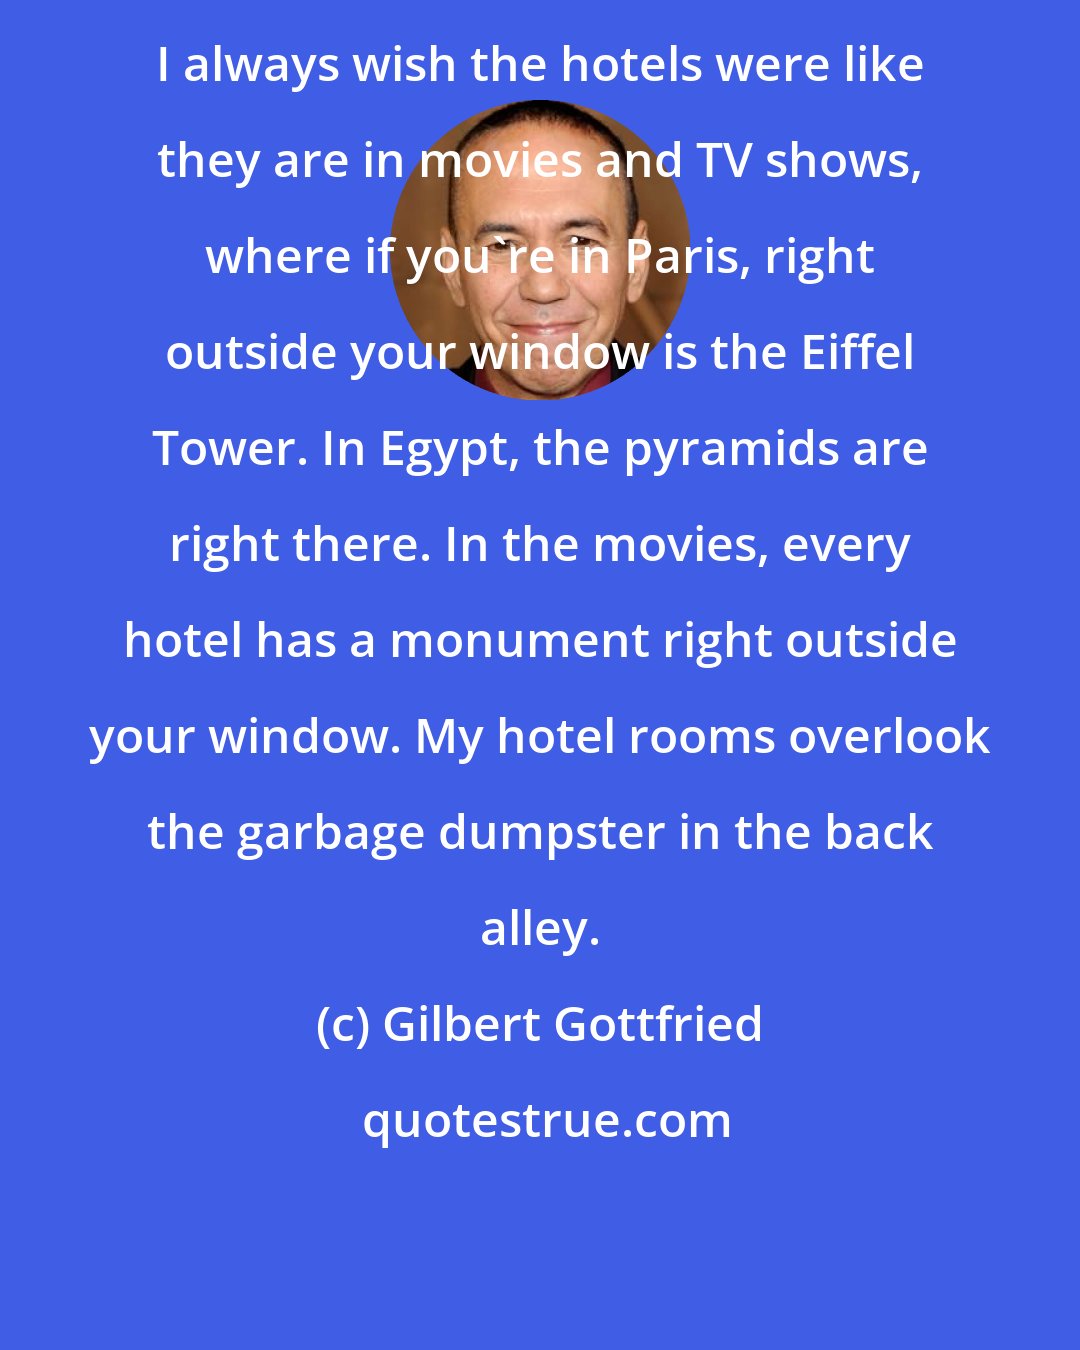 Gilbert Gottfried: I always wish the hotels were like they are in movies and TV shows, where if you're in Paris, right outside your window is the Eiffel Tower. In Egypt, the pyramids are right there. In the movies, every hotel has a monument right outside your window. My hotel rooms overlook the garbage dumpster in the back alley.